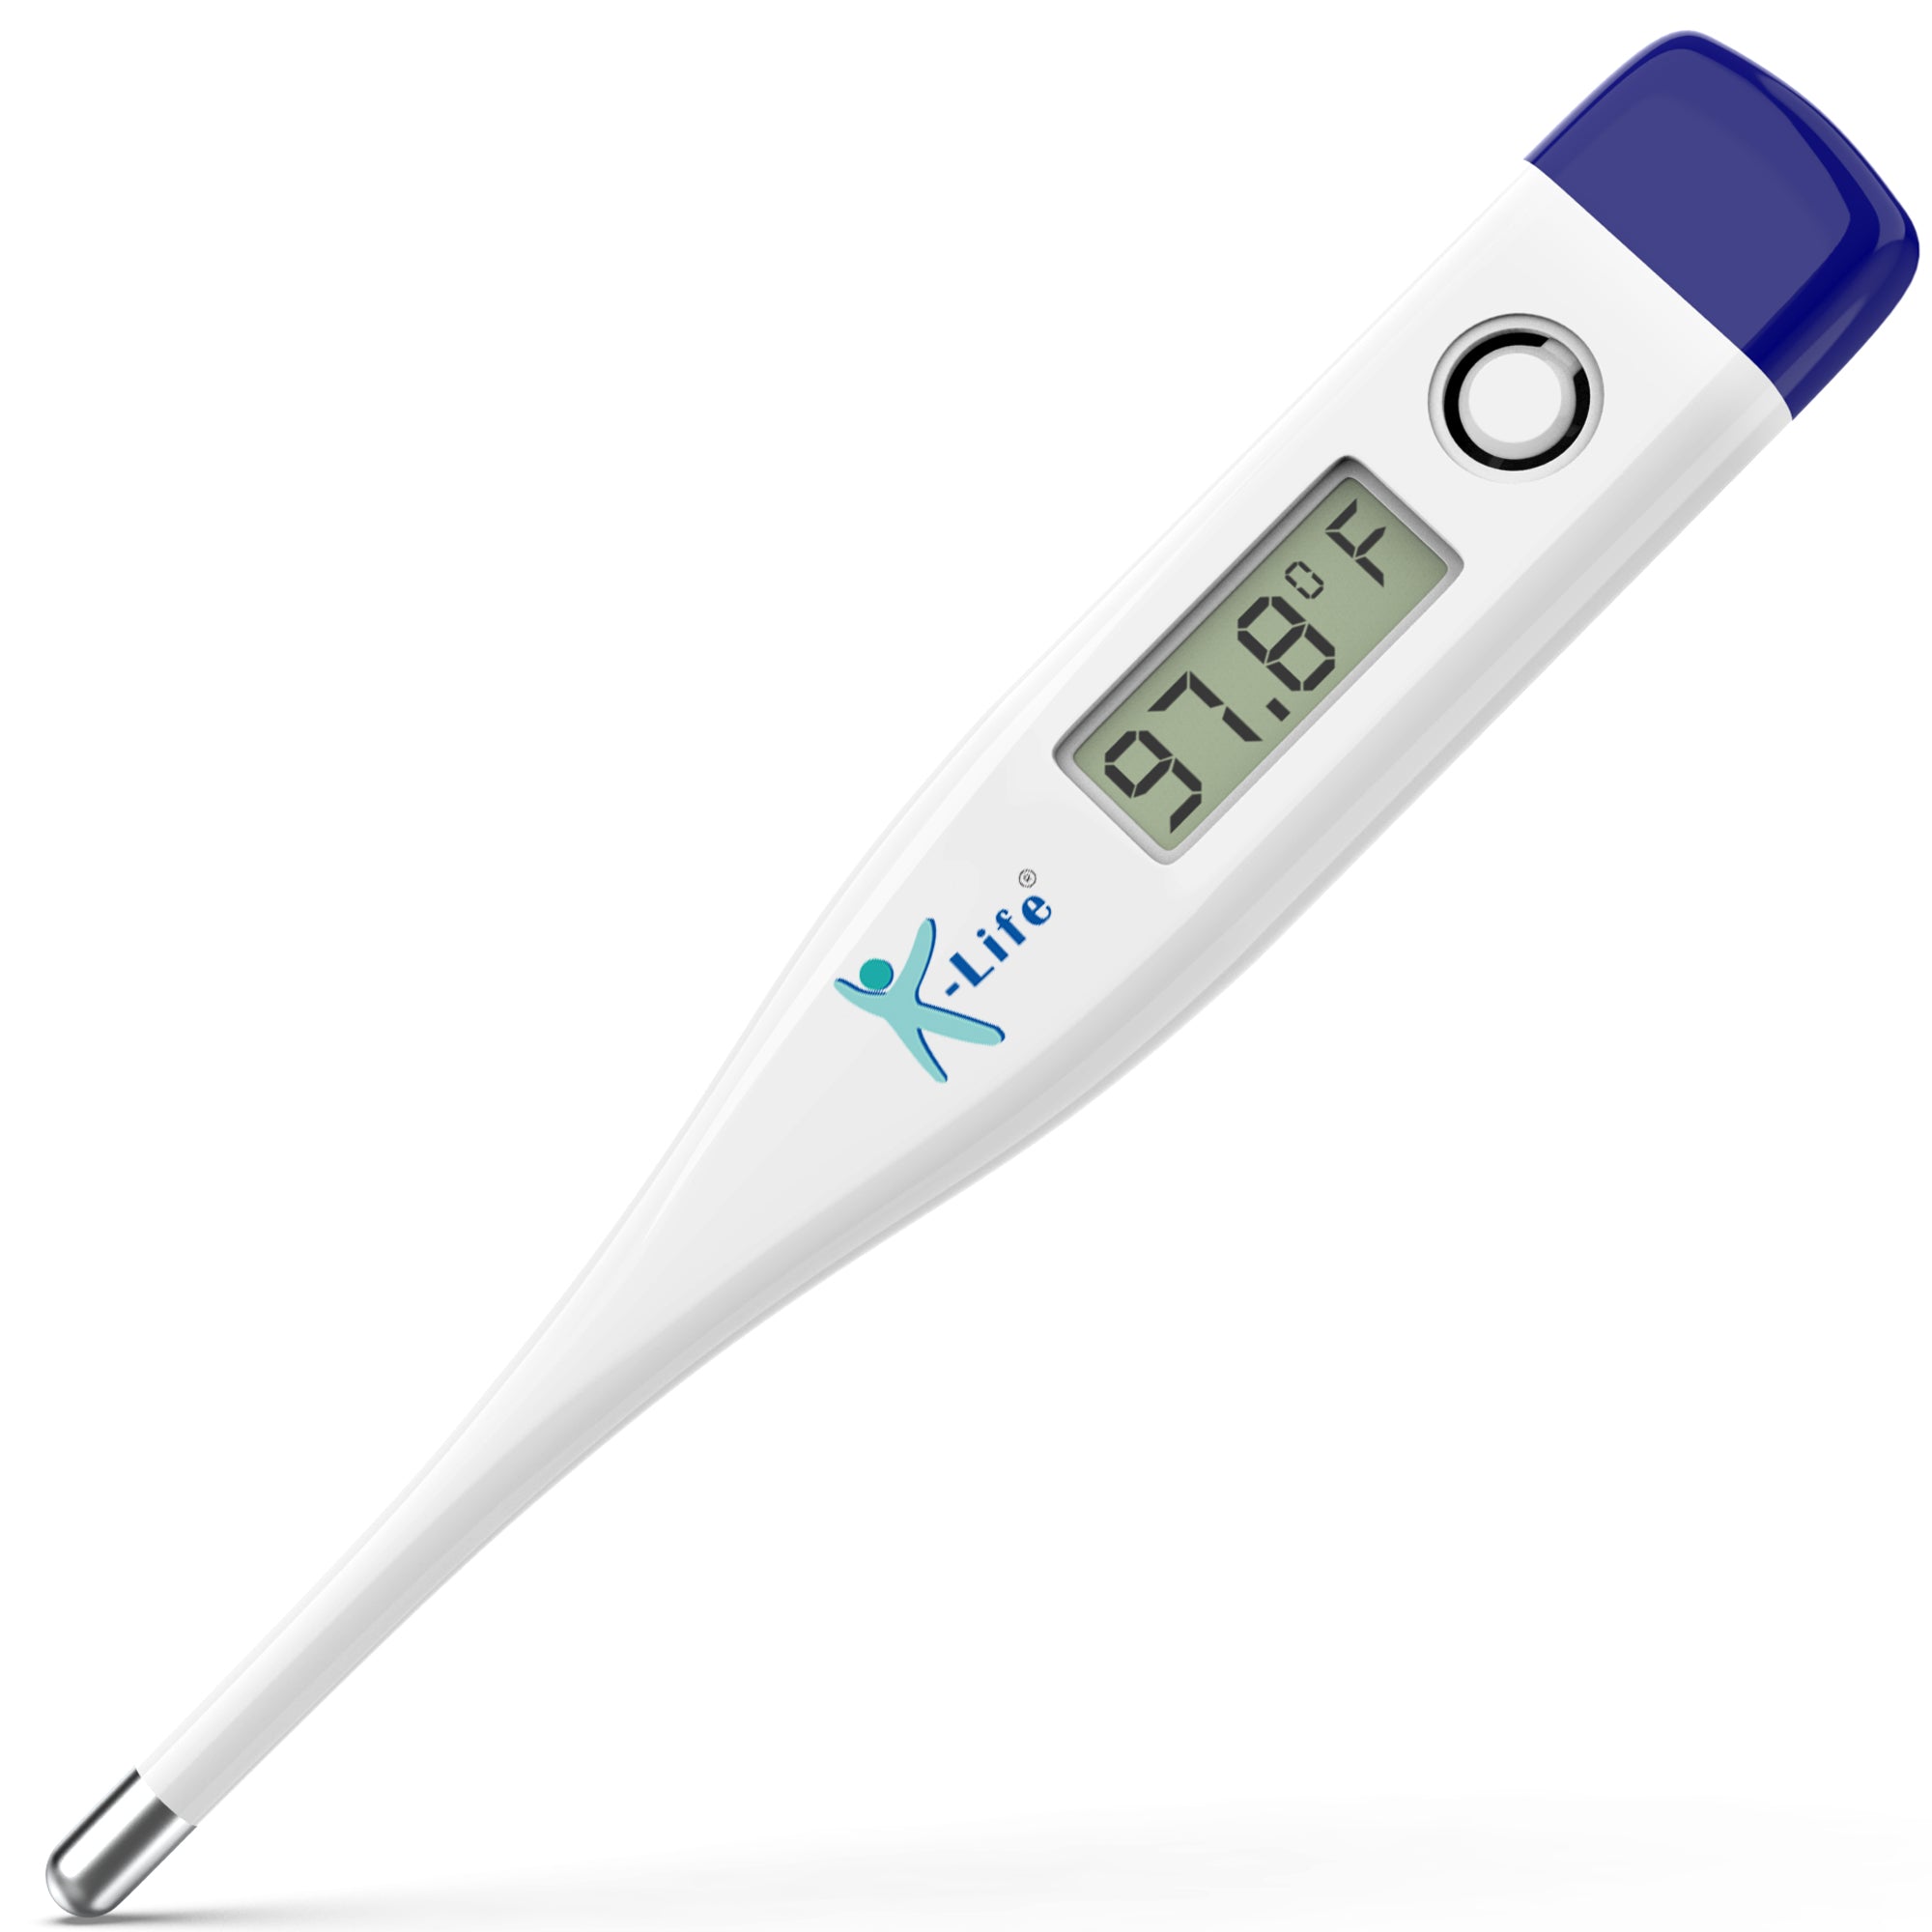 K-life DT-01 Digital Body Fever check Machine for Testing Kids Adults